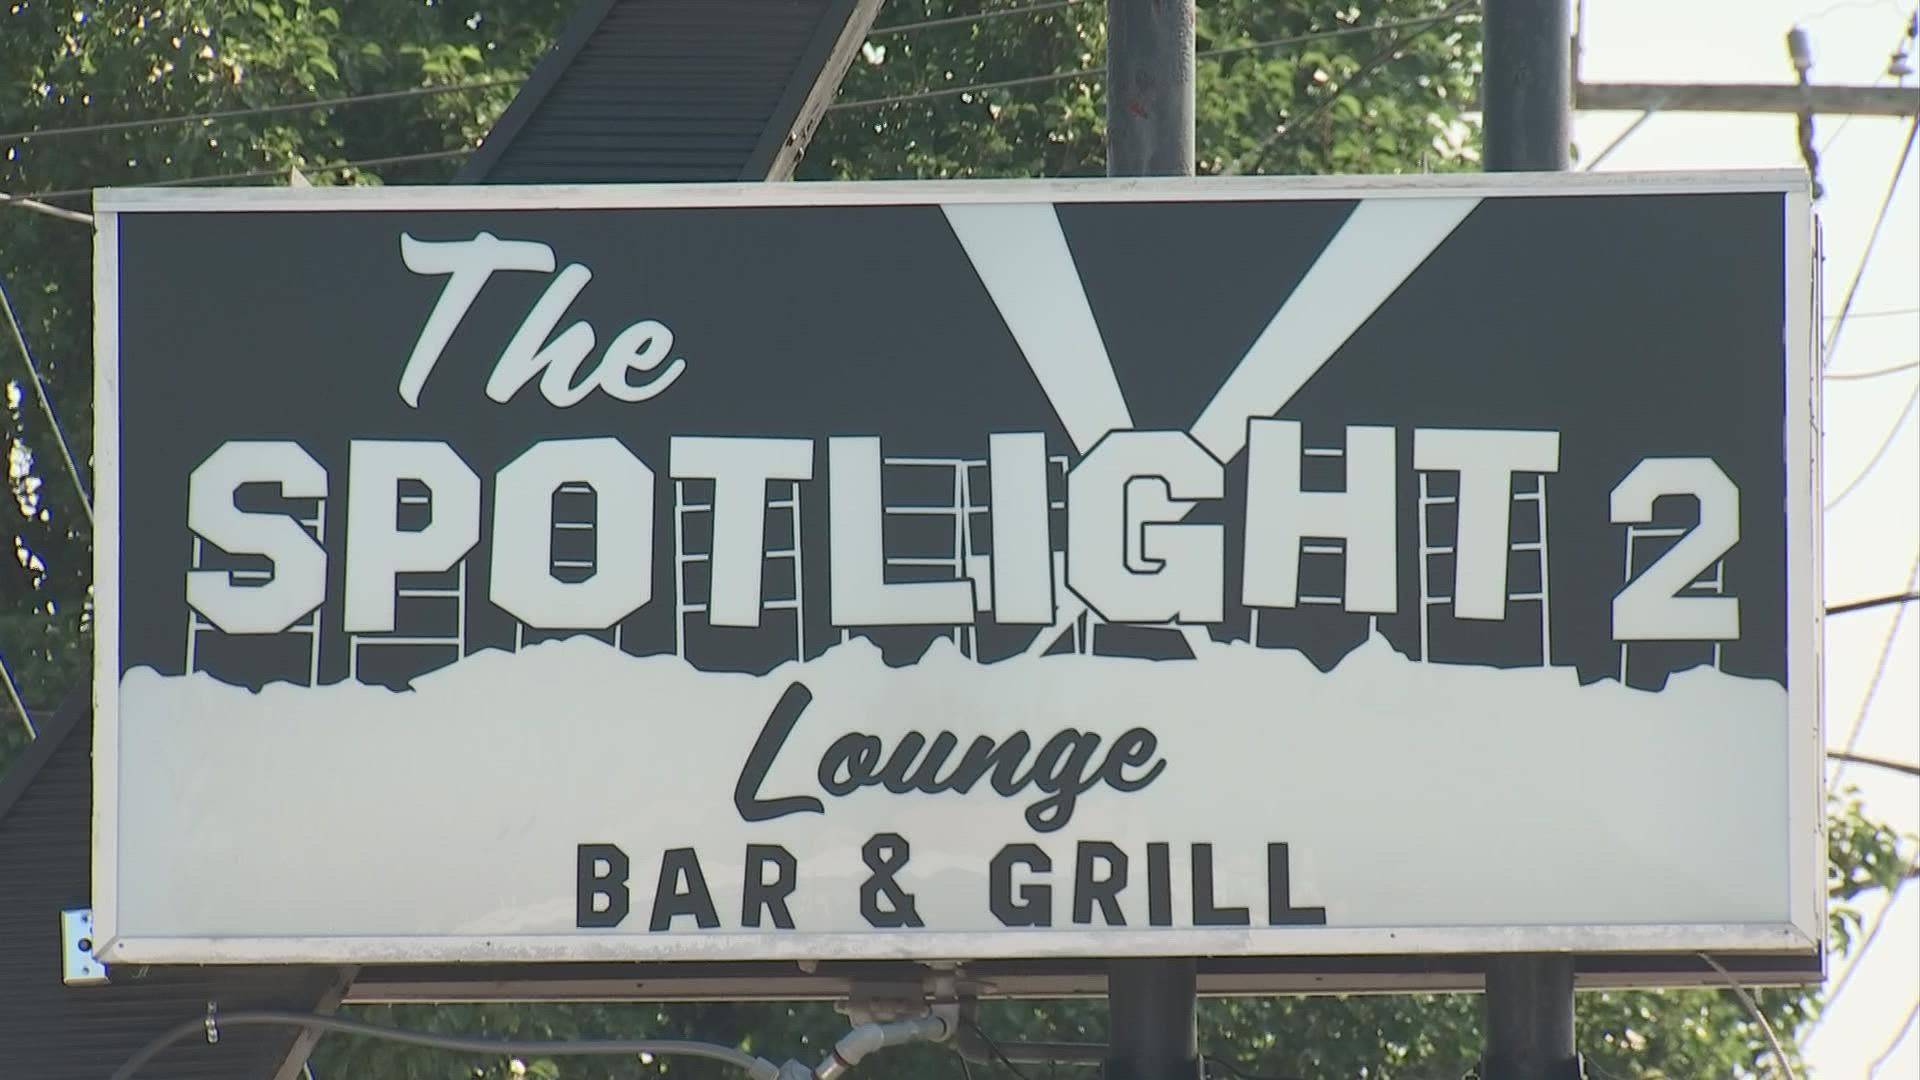 The City of Columbus has secured a court order against a Hilltop bar with a history of violent crime, shootings and robberies in recent years.